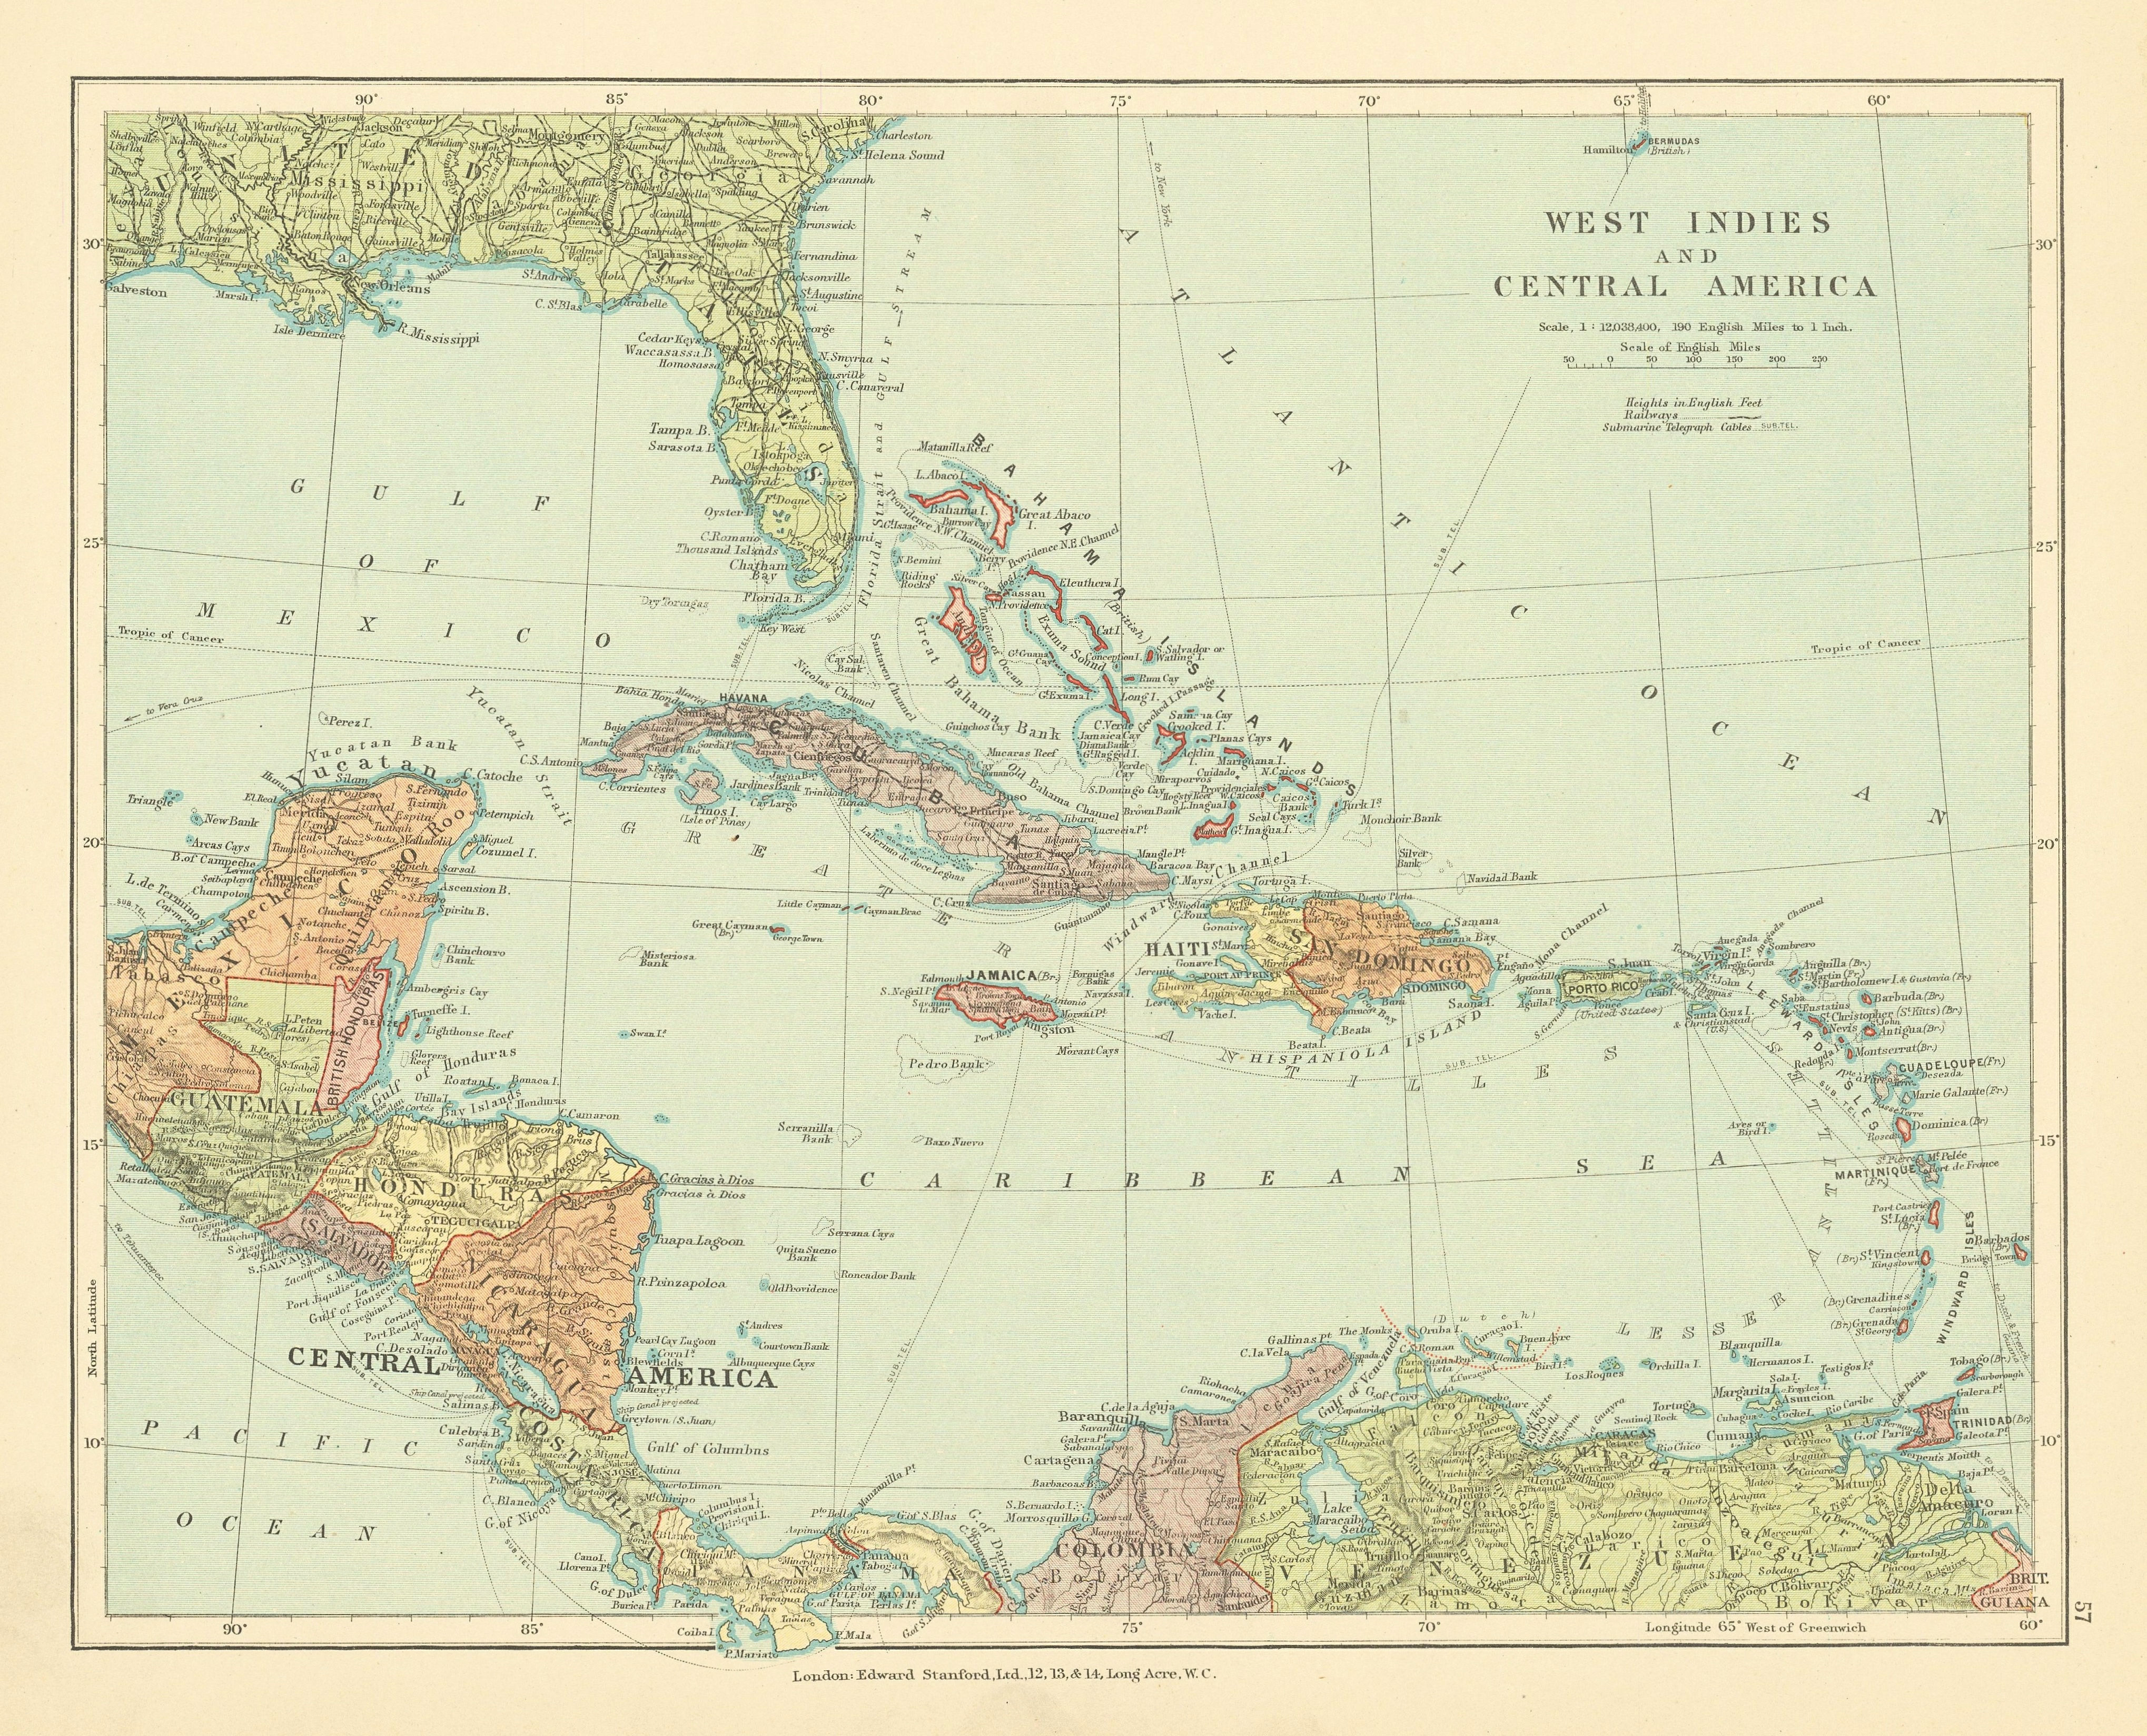 West Indies and Central America. Caribbean. STANFORD c1925 old vintage map